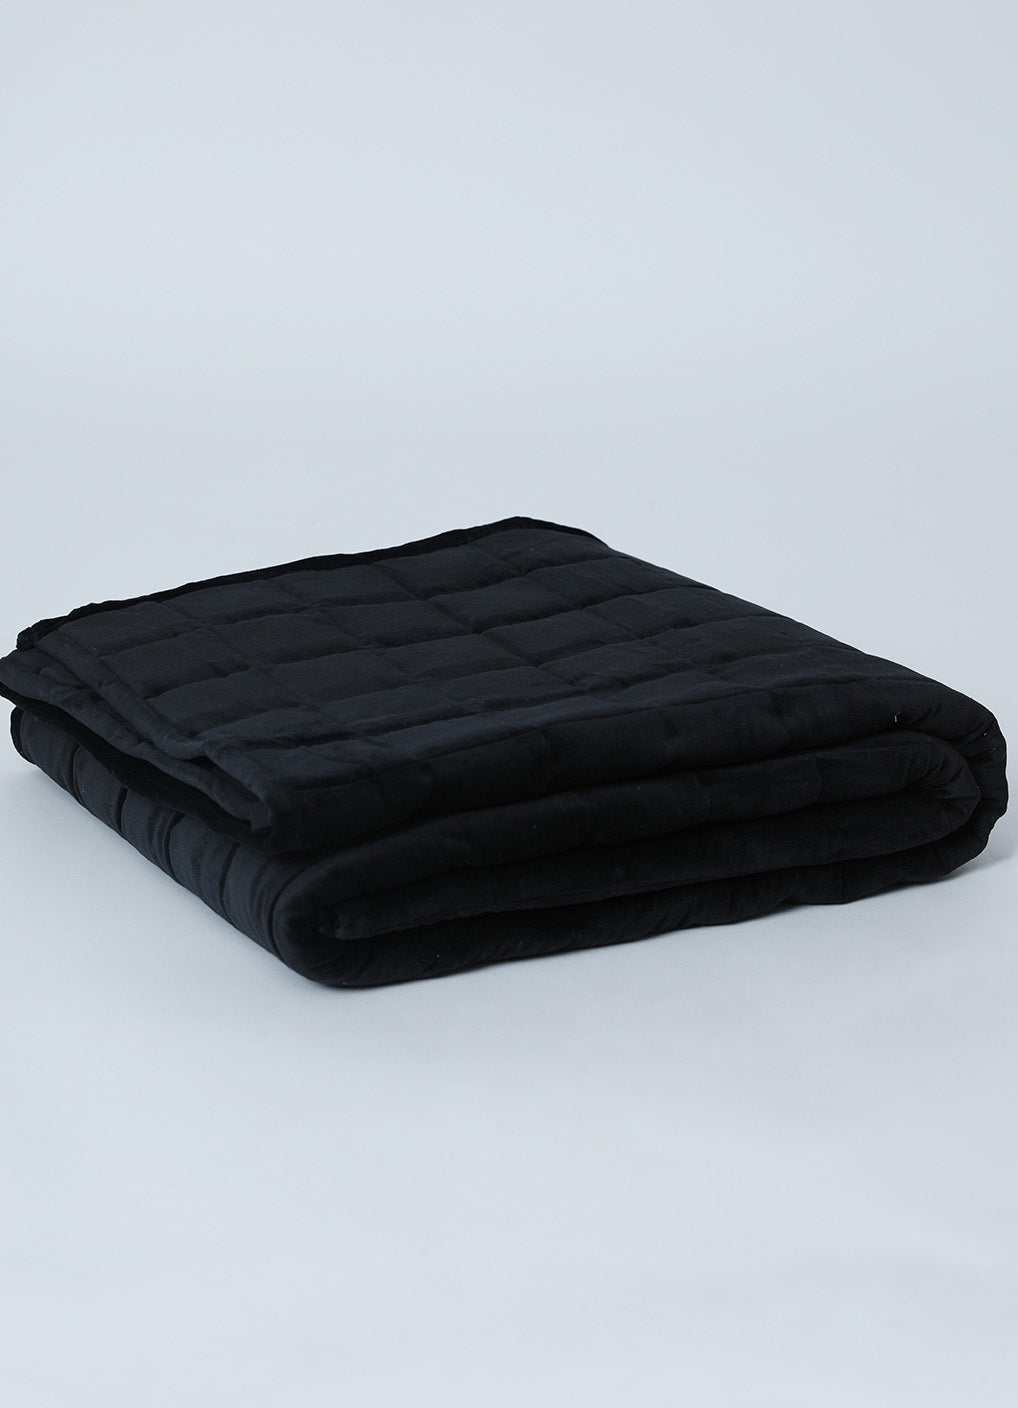 Shop Velvet Weighted Blankets from Tucked In – Tucked In